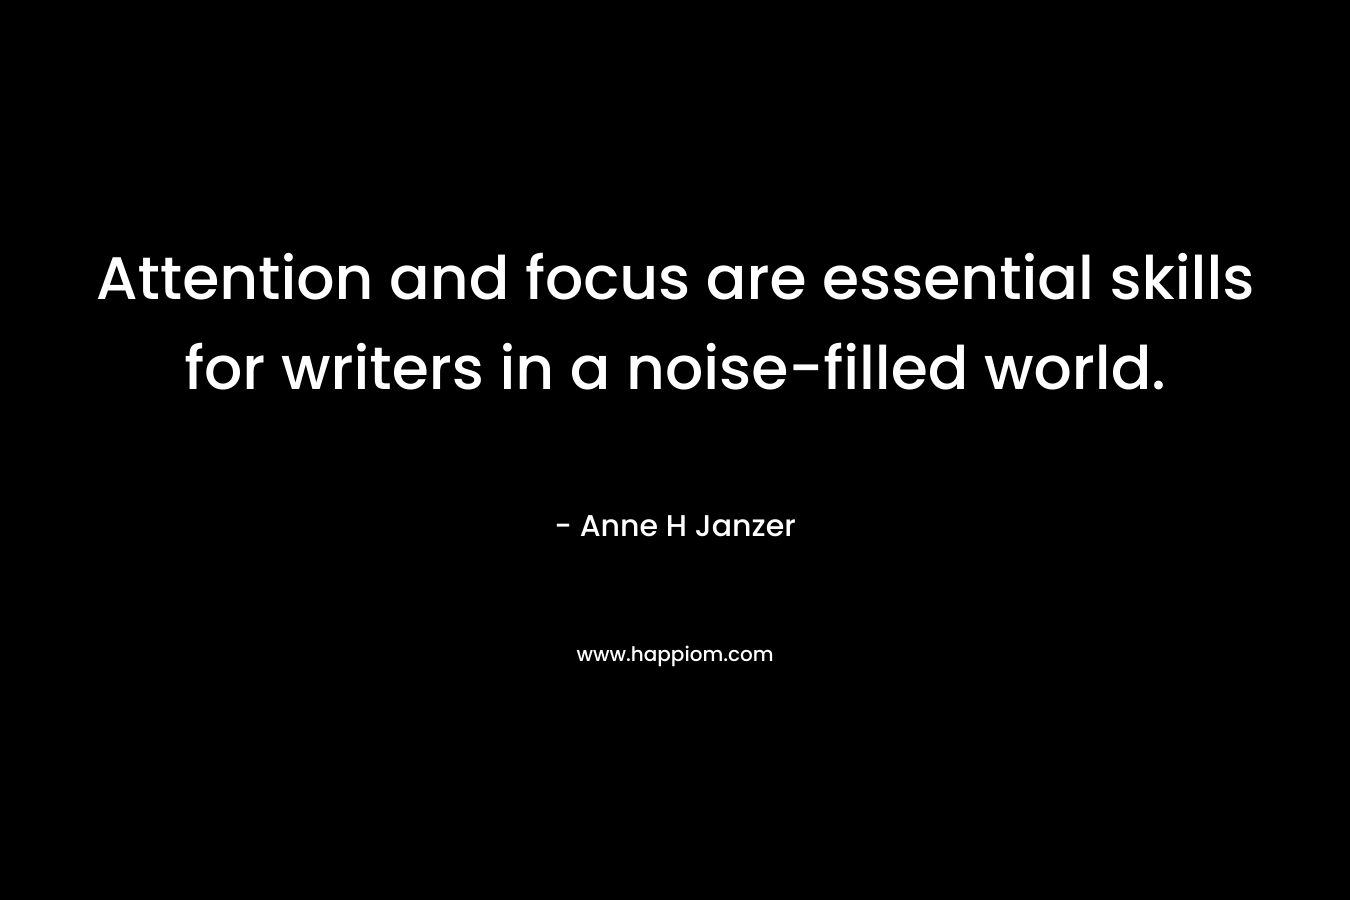 Attention and focus are essential skills for writers in a noise-filled world. – Anne H Janzer